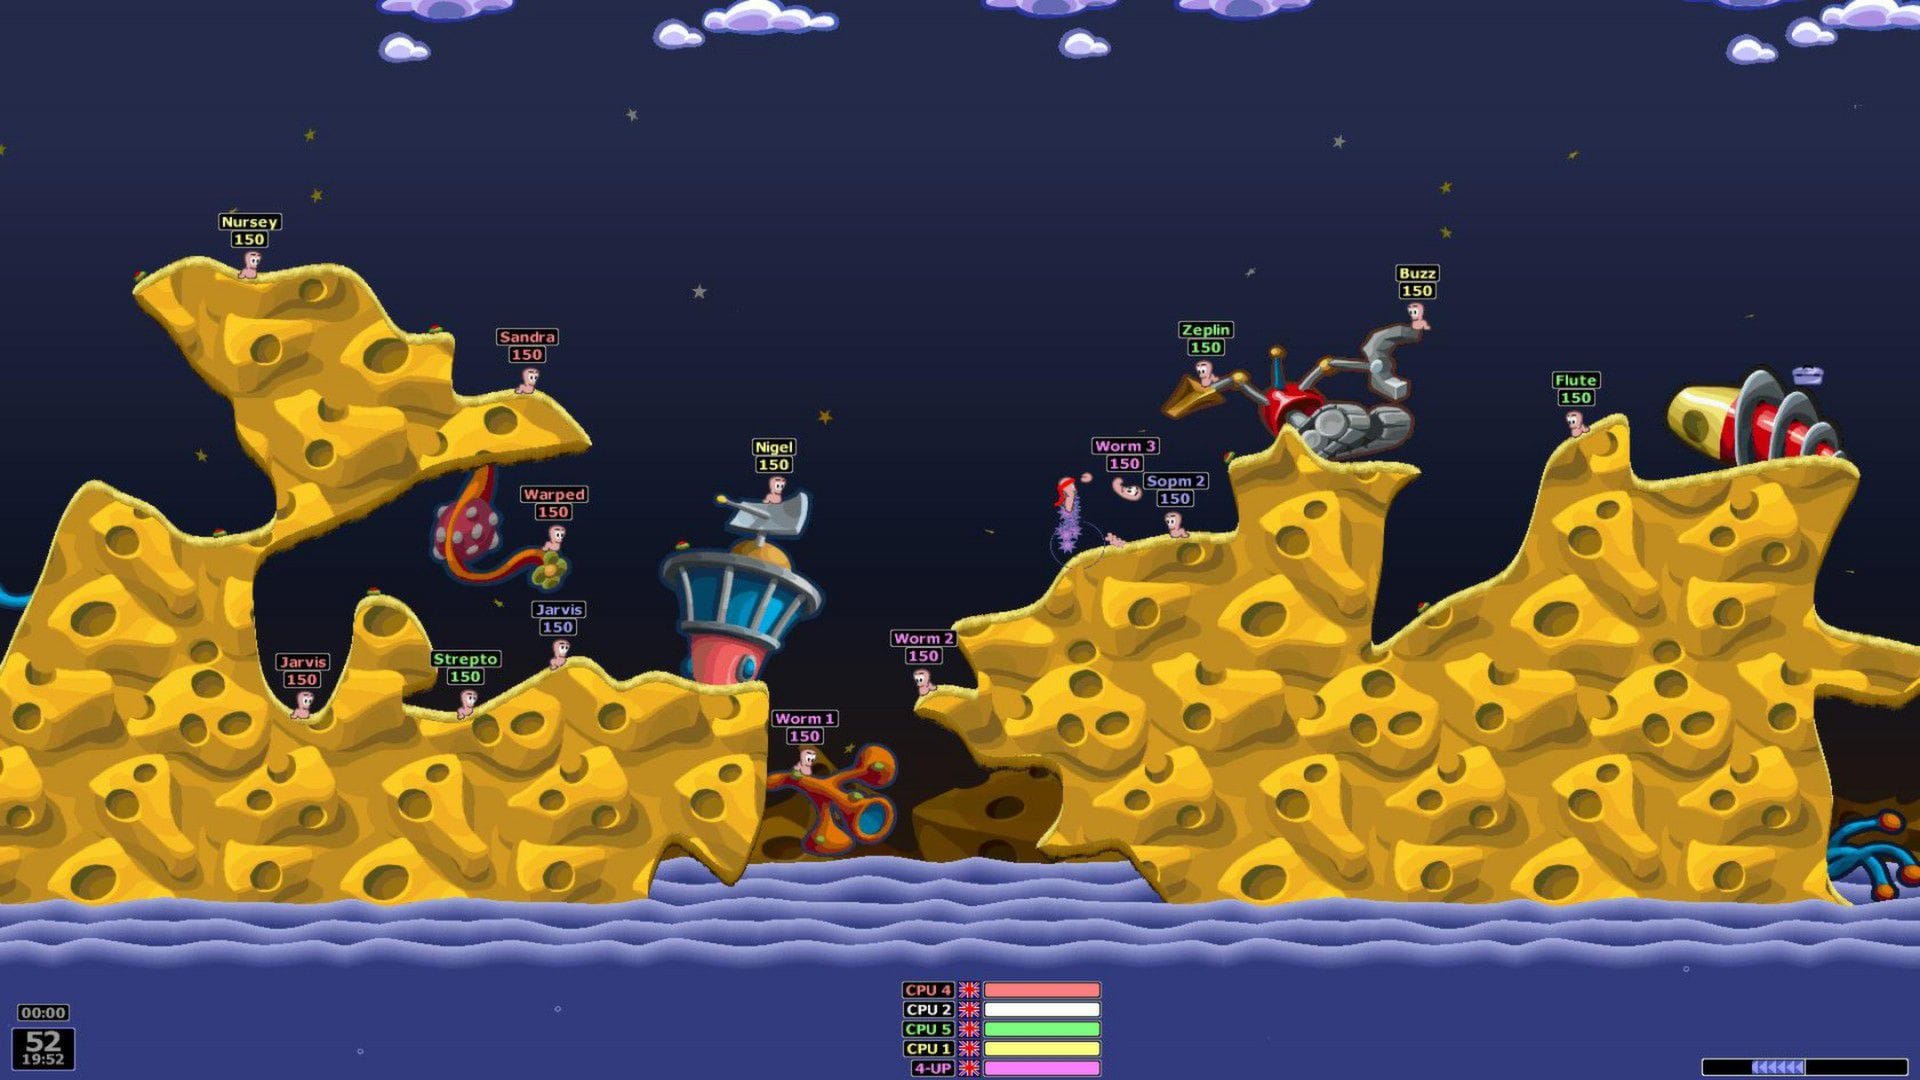 A screenshot from the game Worms: Armageddon.